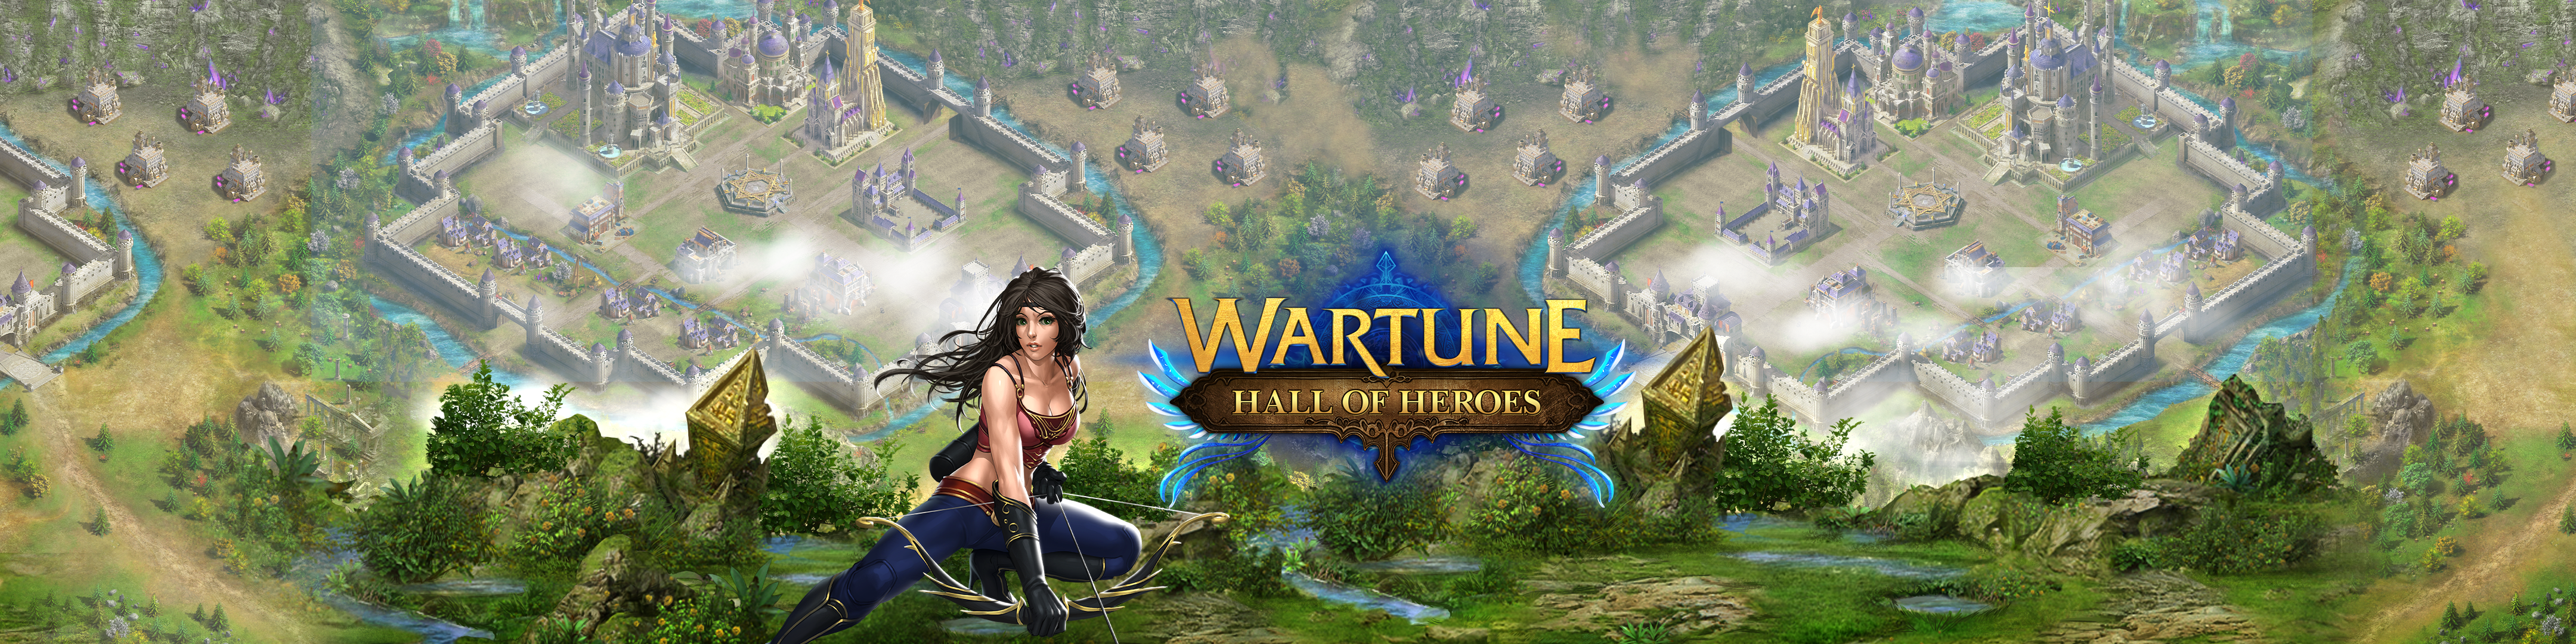 Wartune Hall Of Heroes Overview Apple App Store Us - free gear glitch in tower of hell roblox